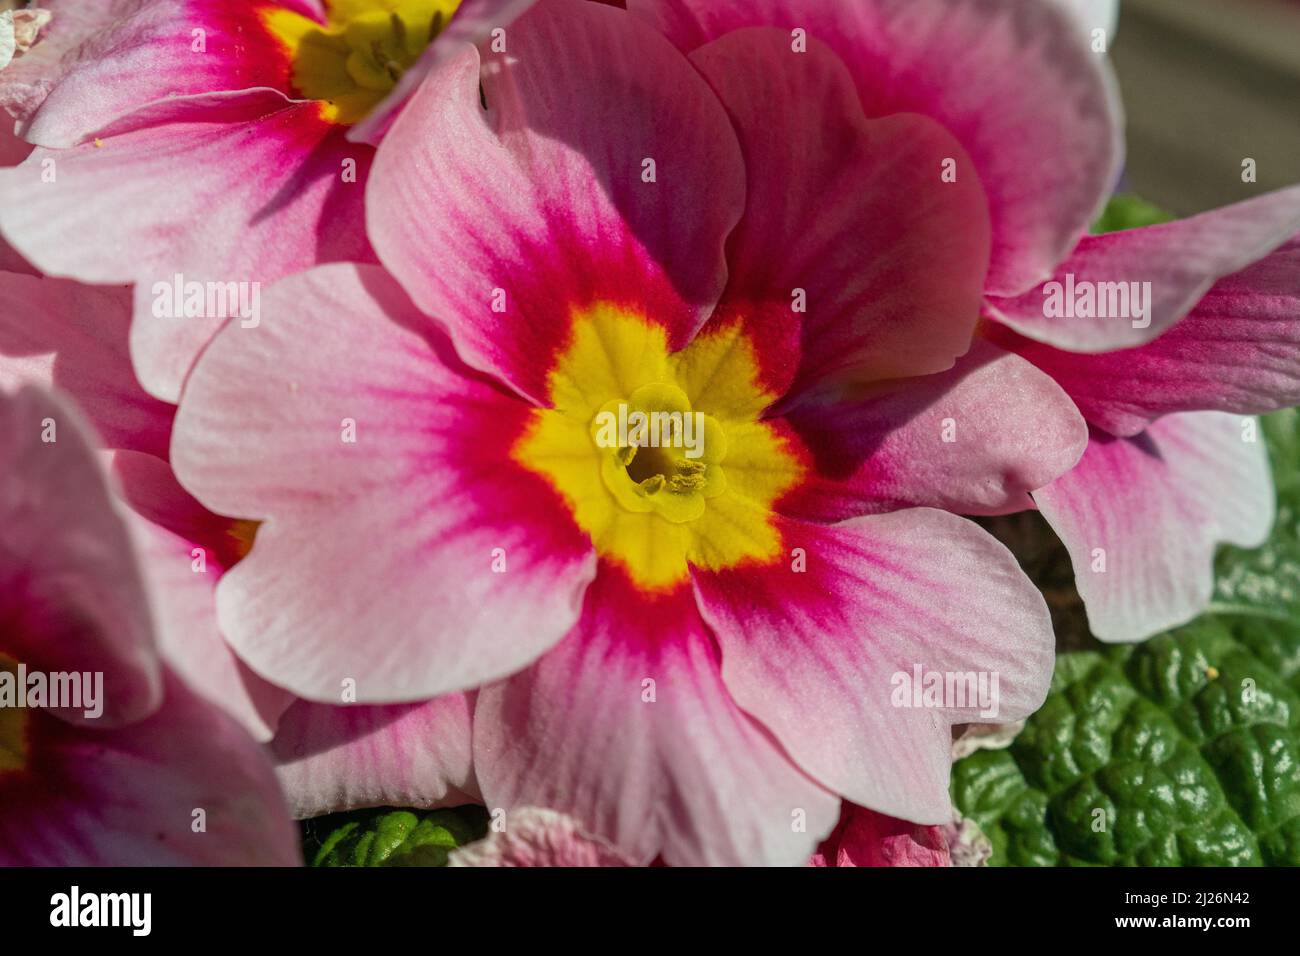 Pink Flower Close up showing extreme detail Stock Photo